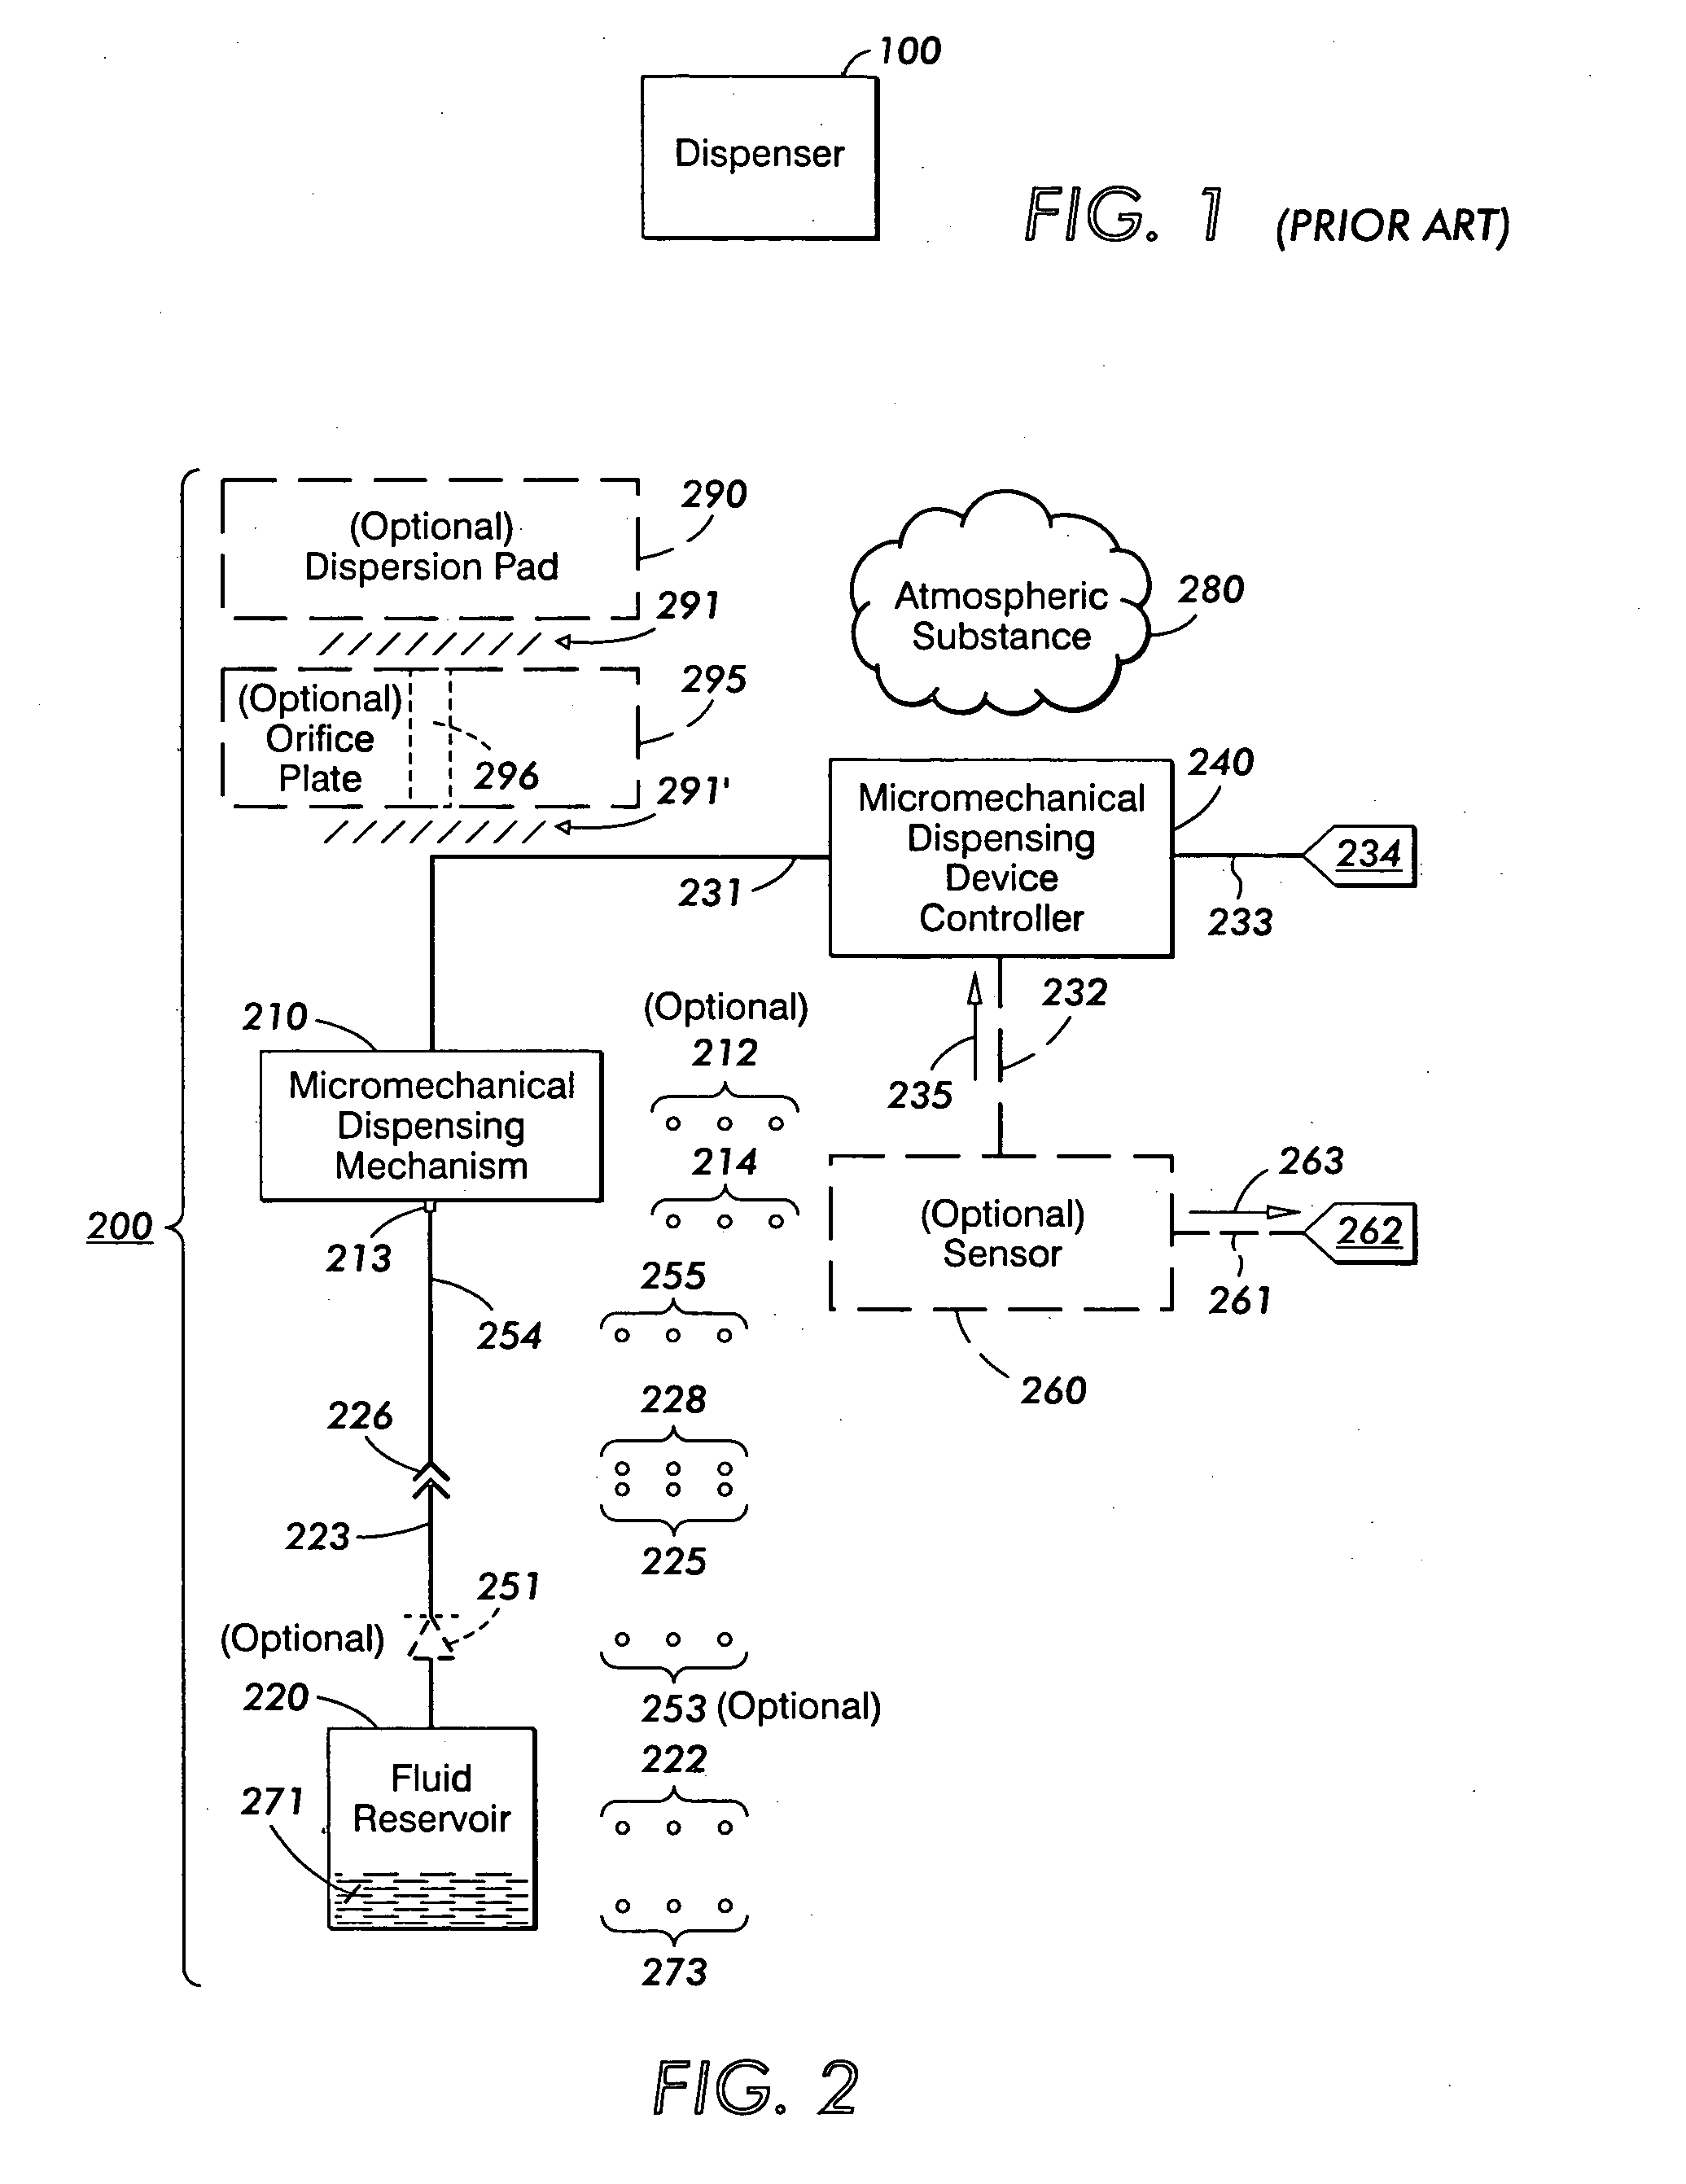 Device and system for dispensing fluids into the atmosphere